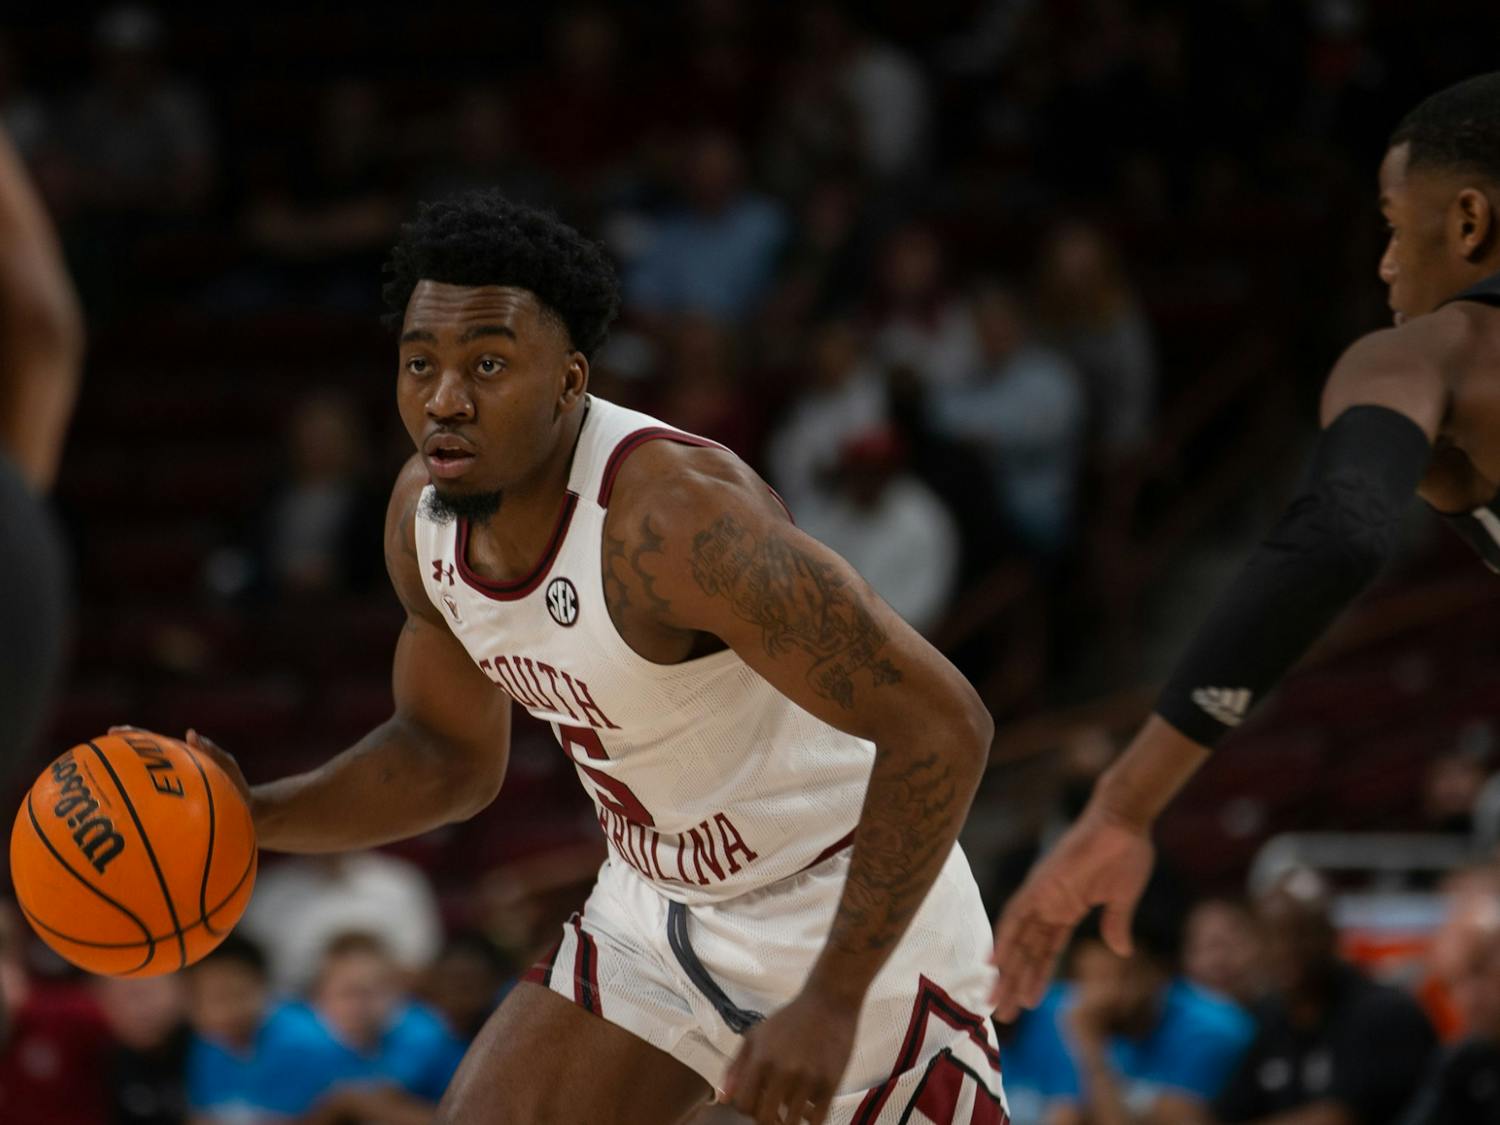 The Gamecocks defeated the Bulldogs 66-56.&nbsp;